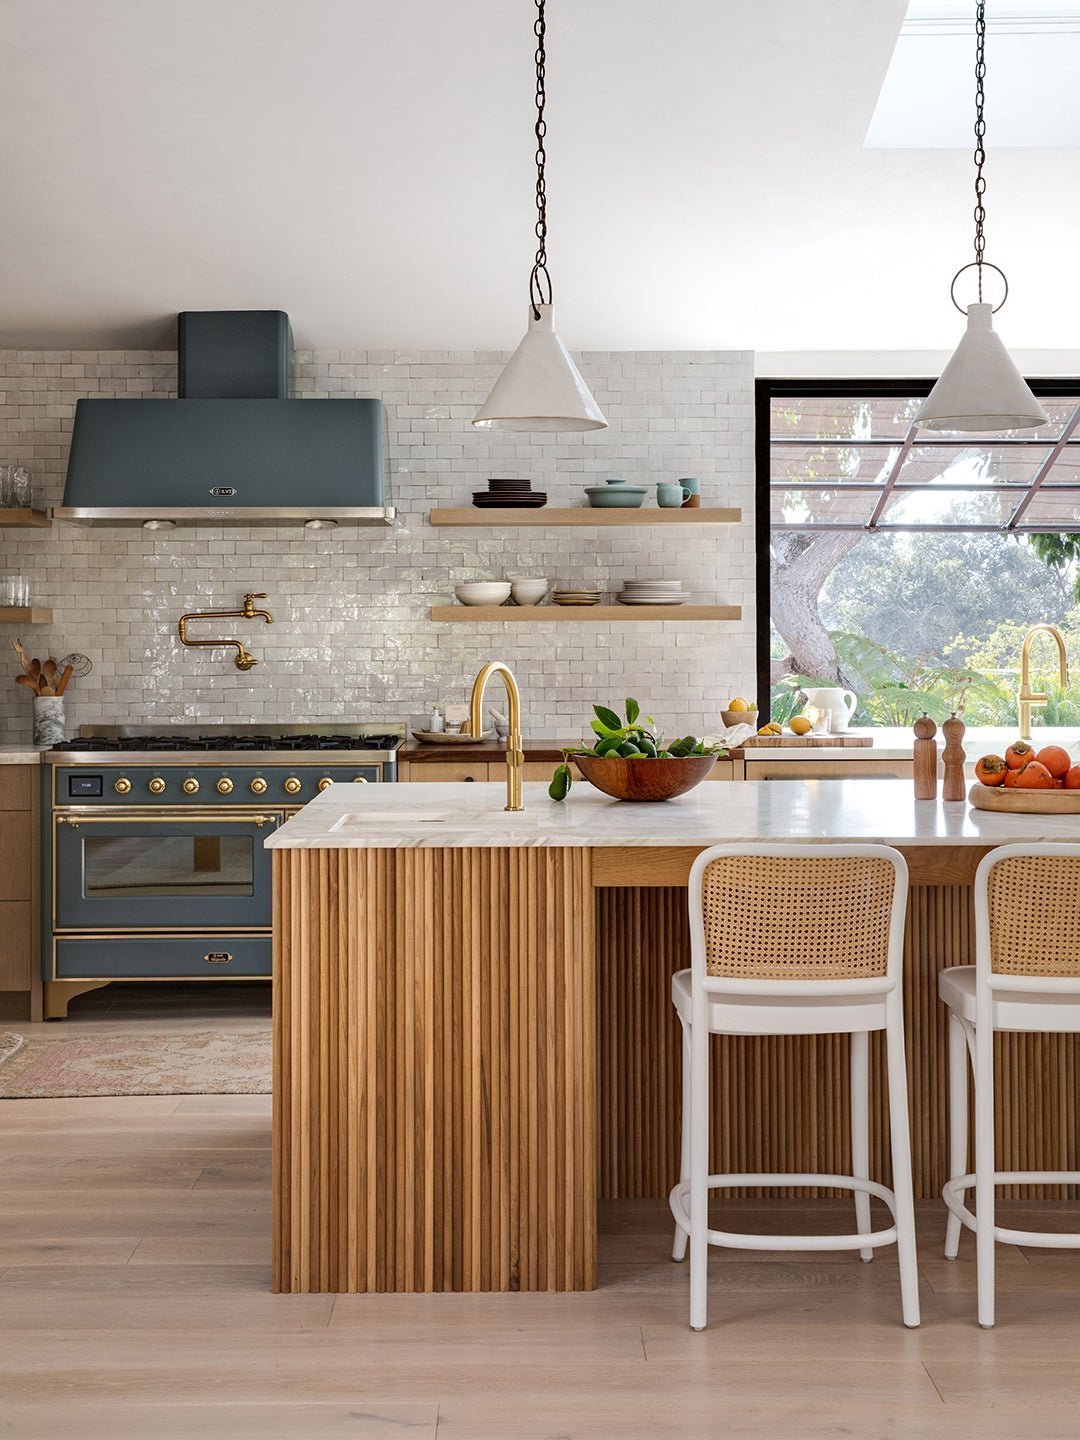 This ever-popular kitchen layout is back (again)